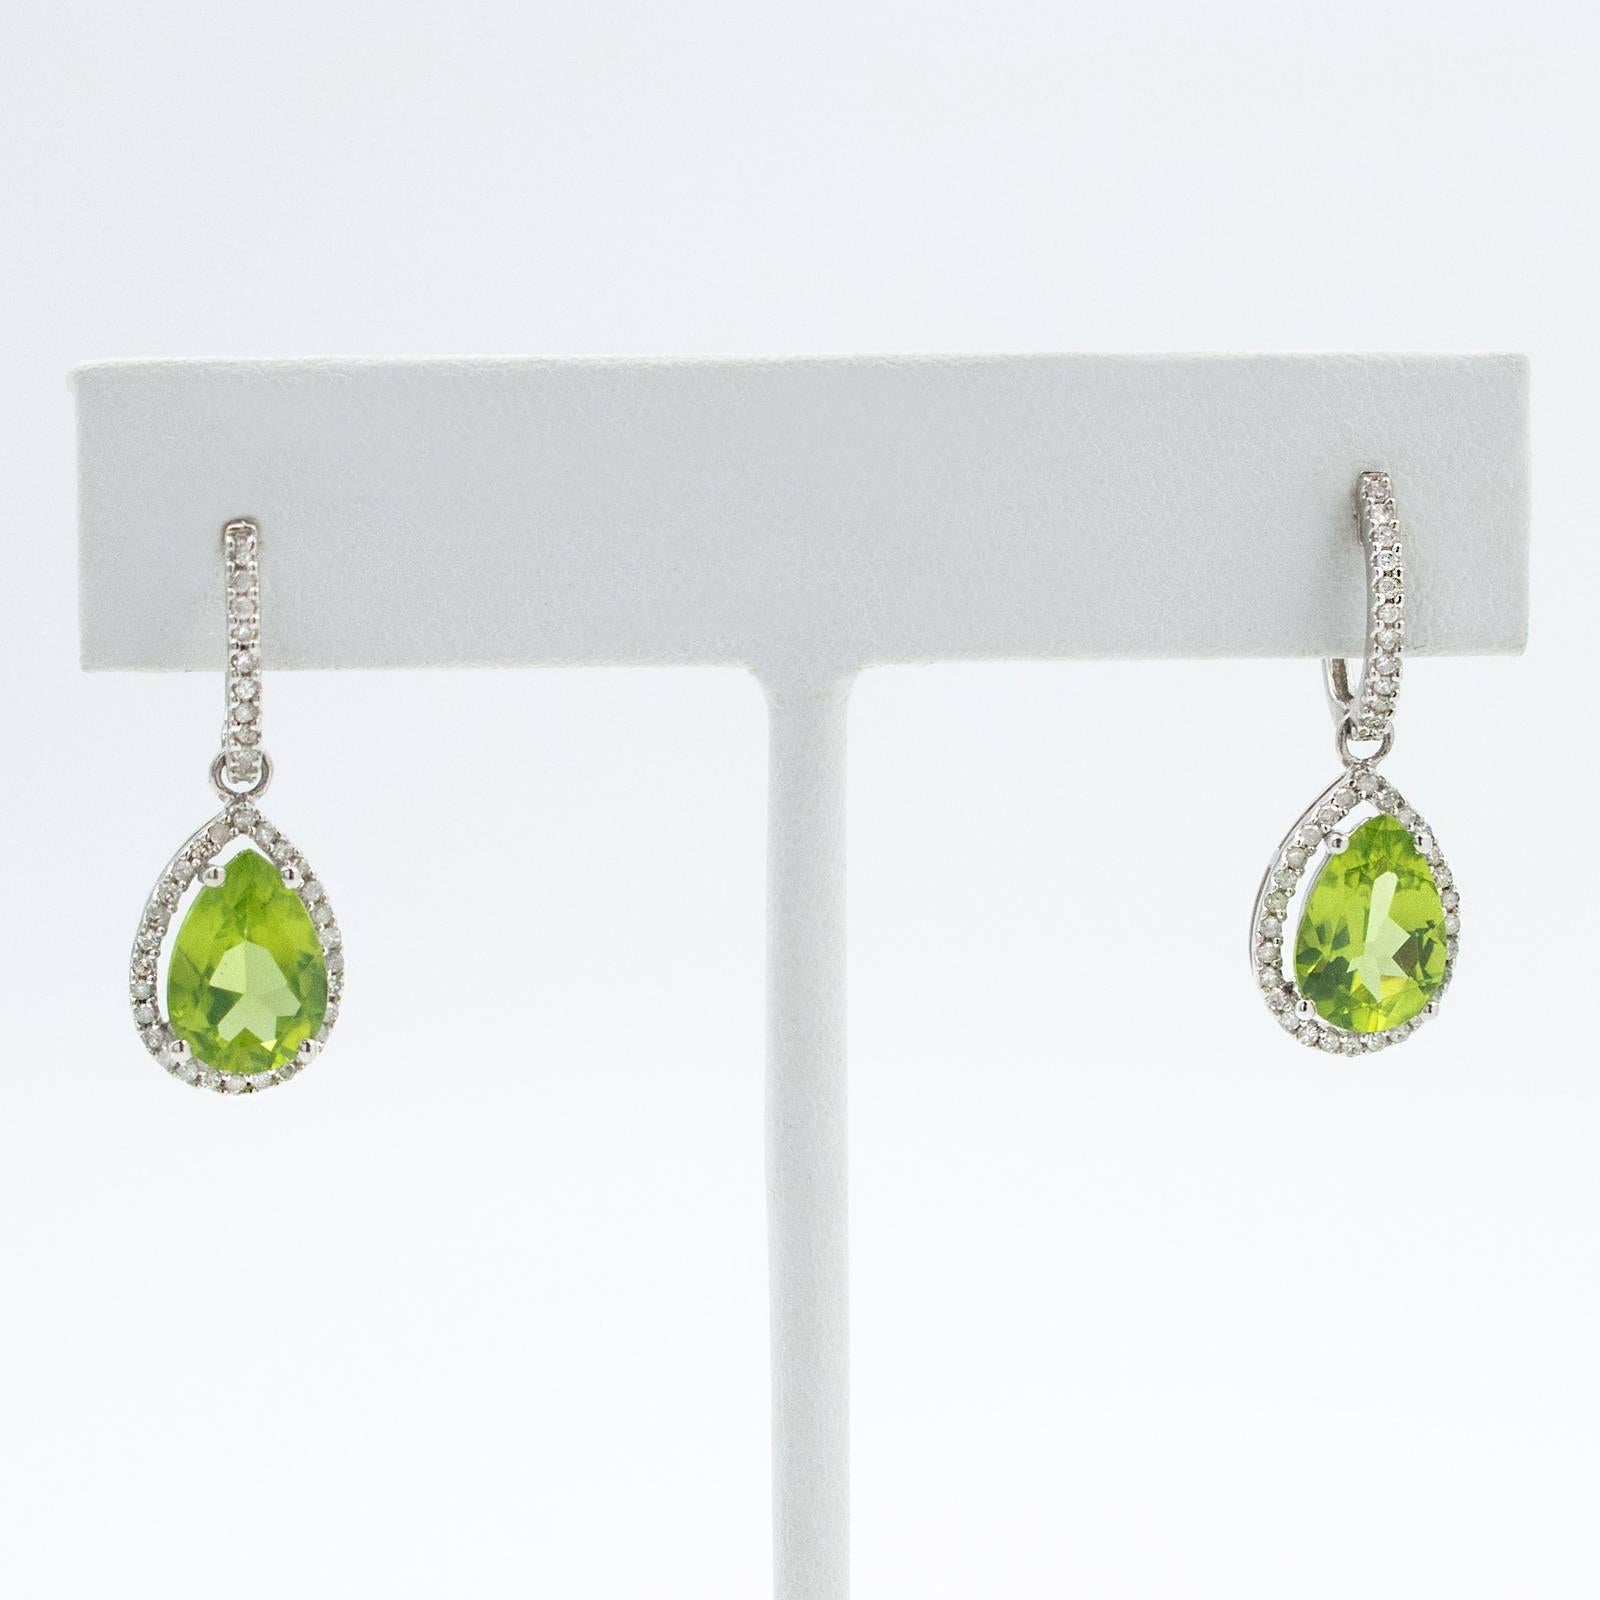 Beautiful pear shaped Peridot drops totaling 4.20 carats are suspended from Diamond set Huggies in 14 karat white gold.

The earrings hang 25mm or 1 inch long top to bottom and are for pierced ears.

CONDITION:  In overall excellent condition with